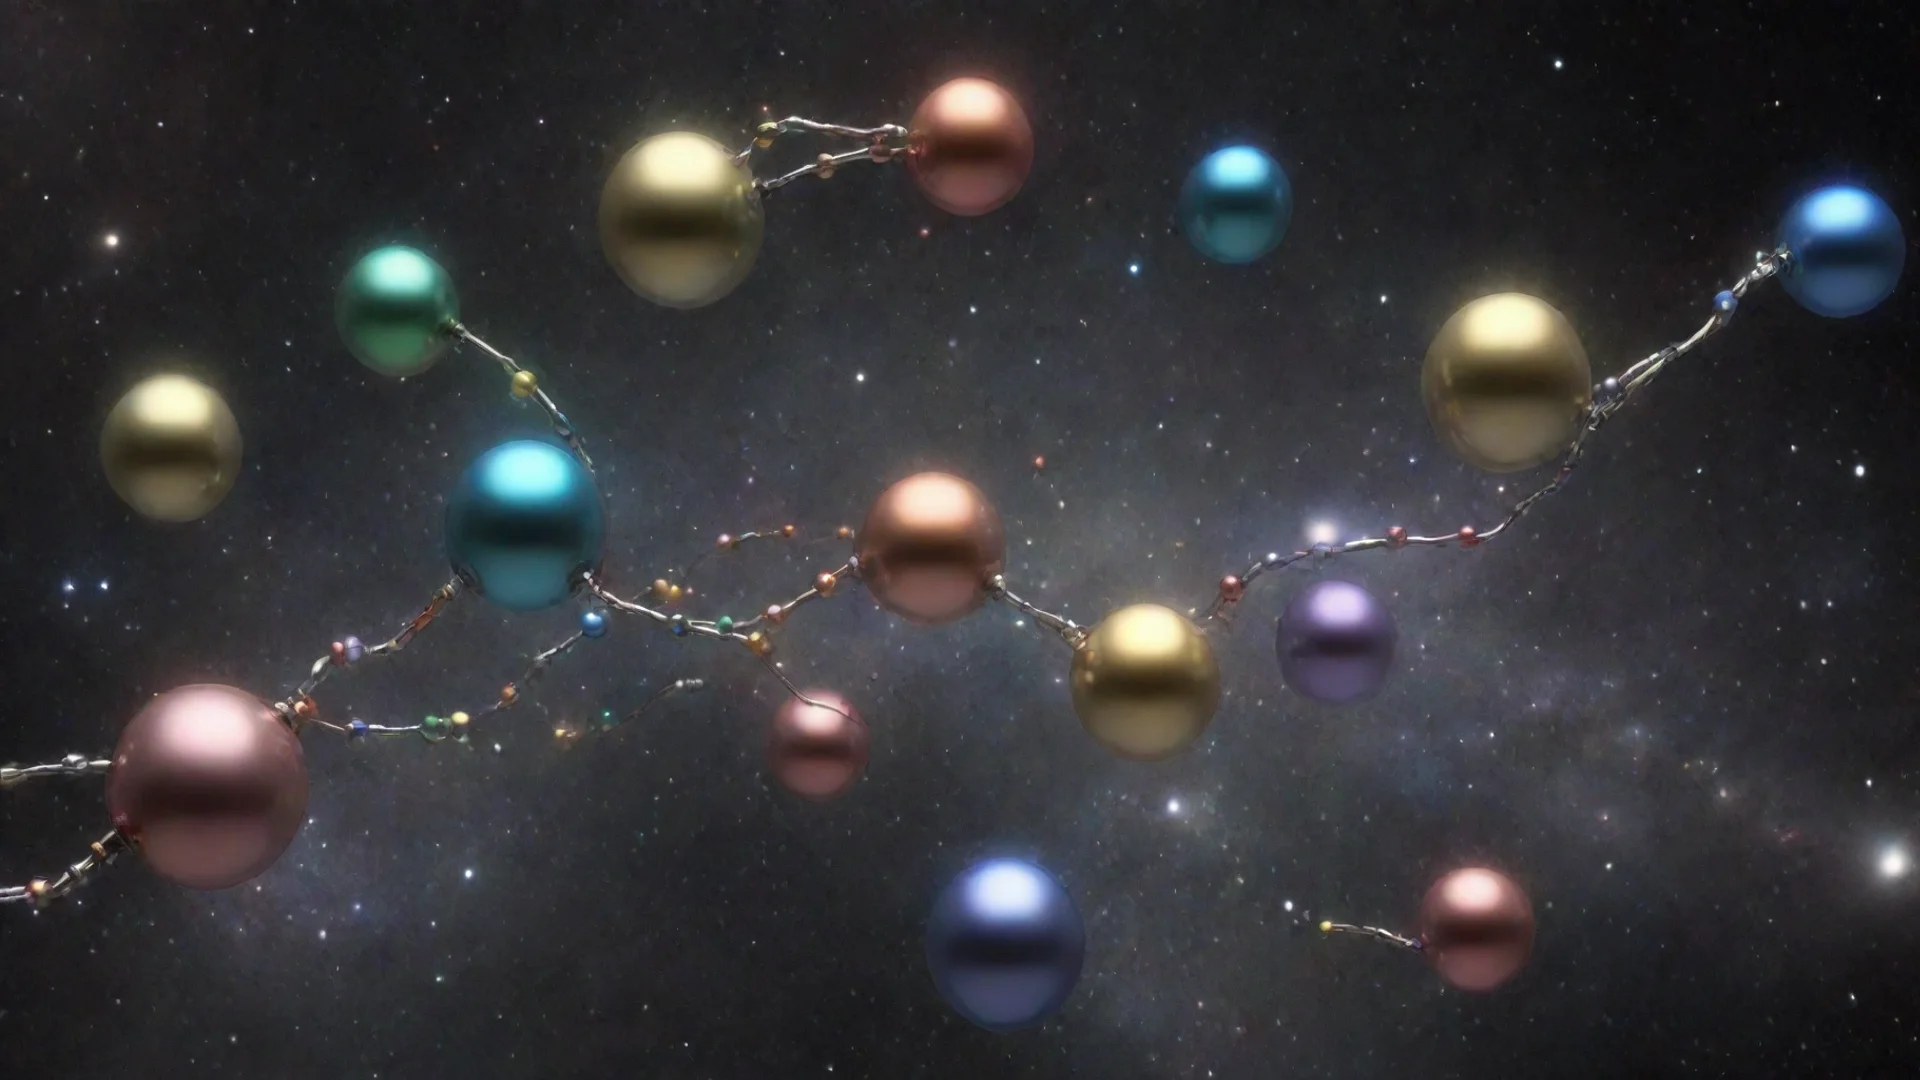 amazing metallic multicolored spheres distributed in space and linked by irridescent tubes. awesome portrait 2 wide